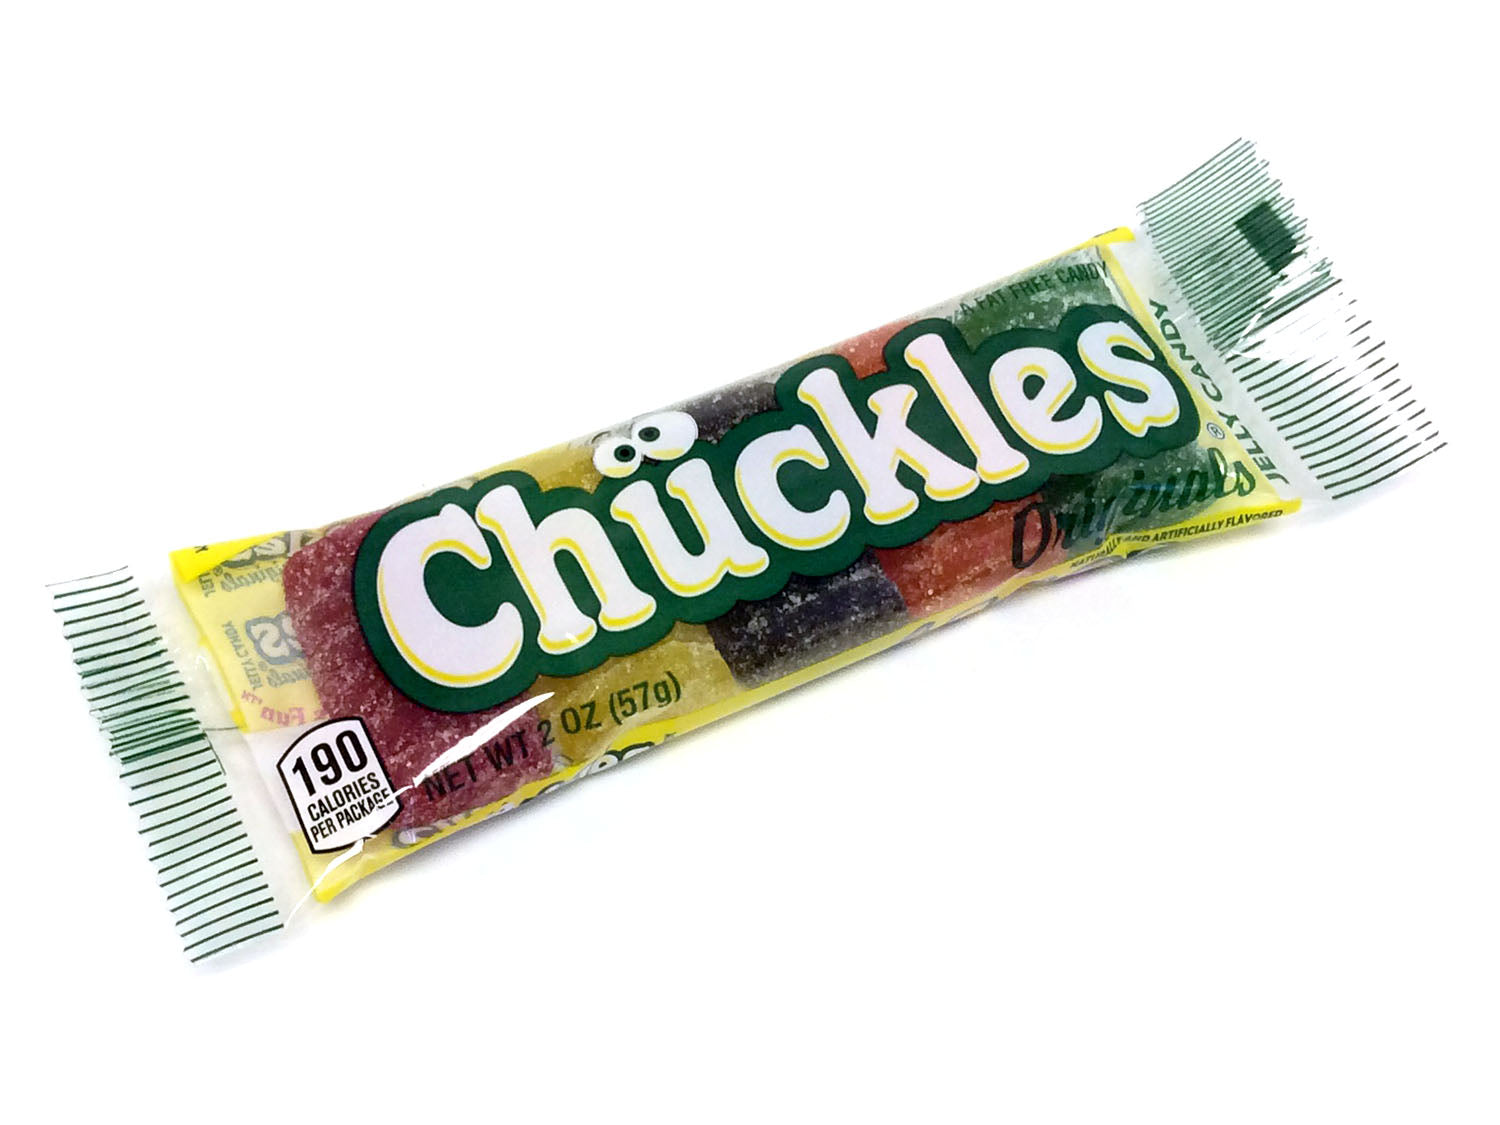 Chuckles - 2 oz pack